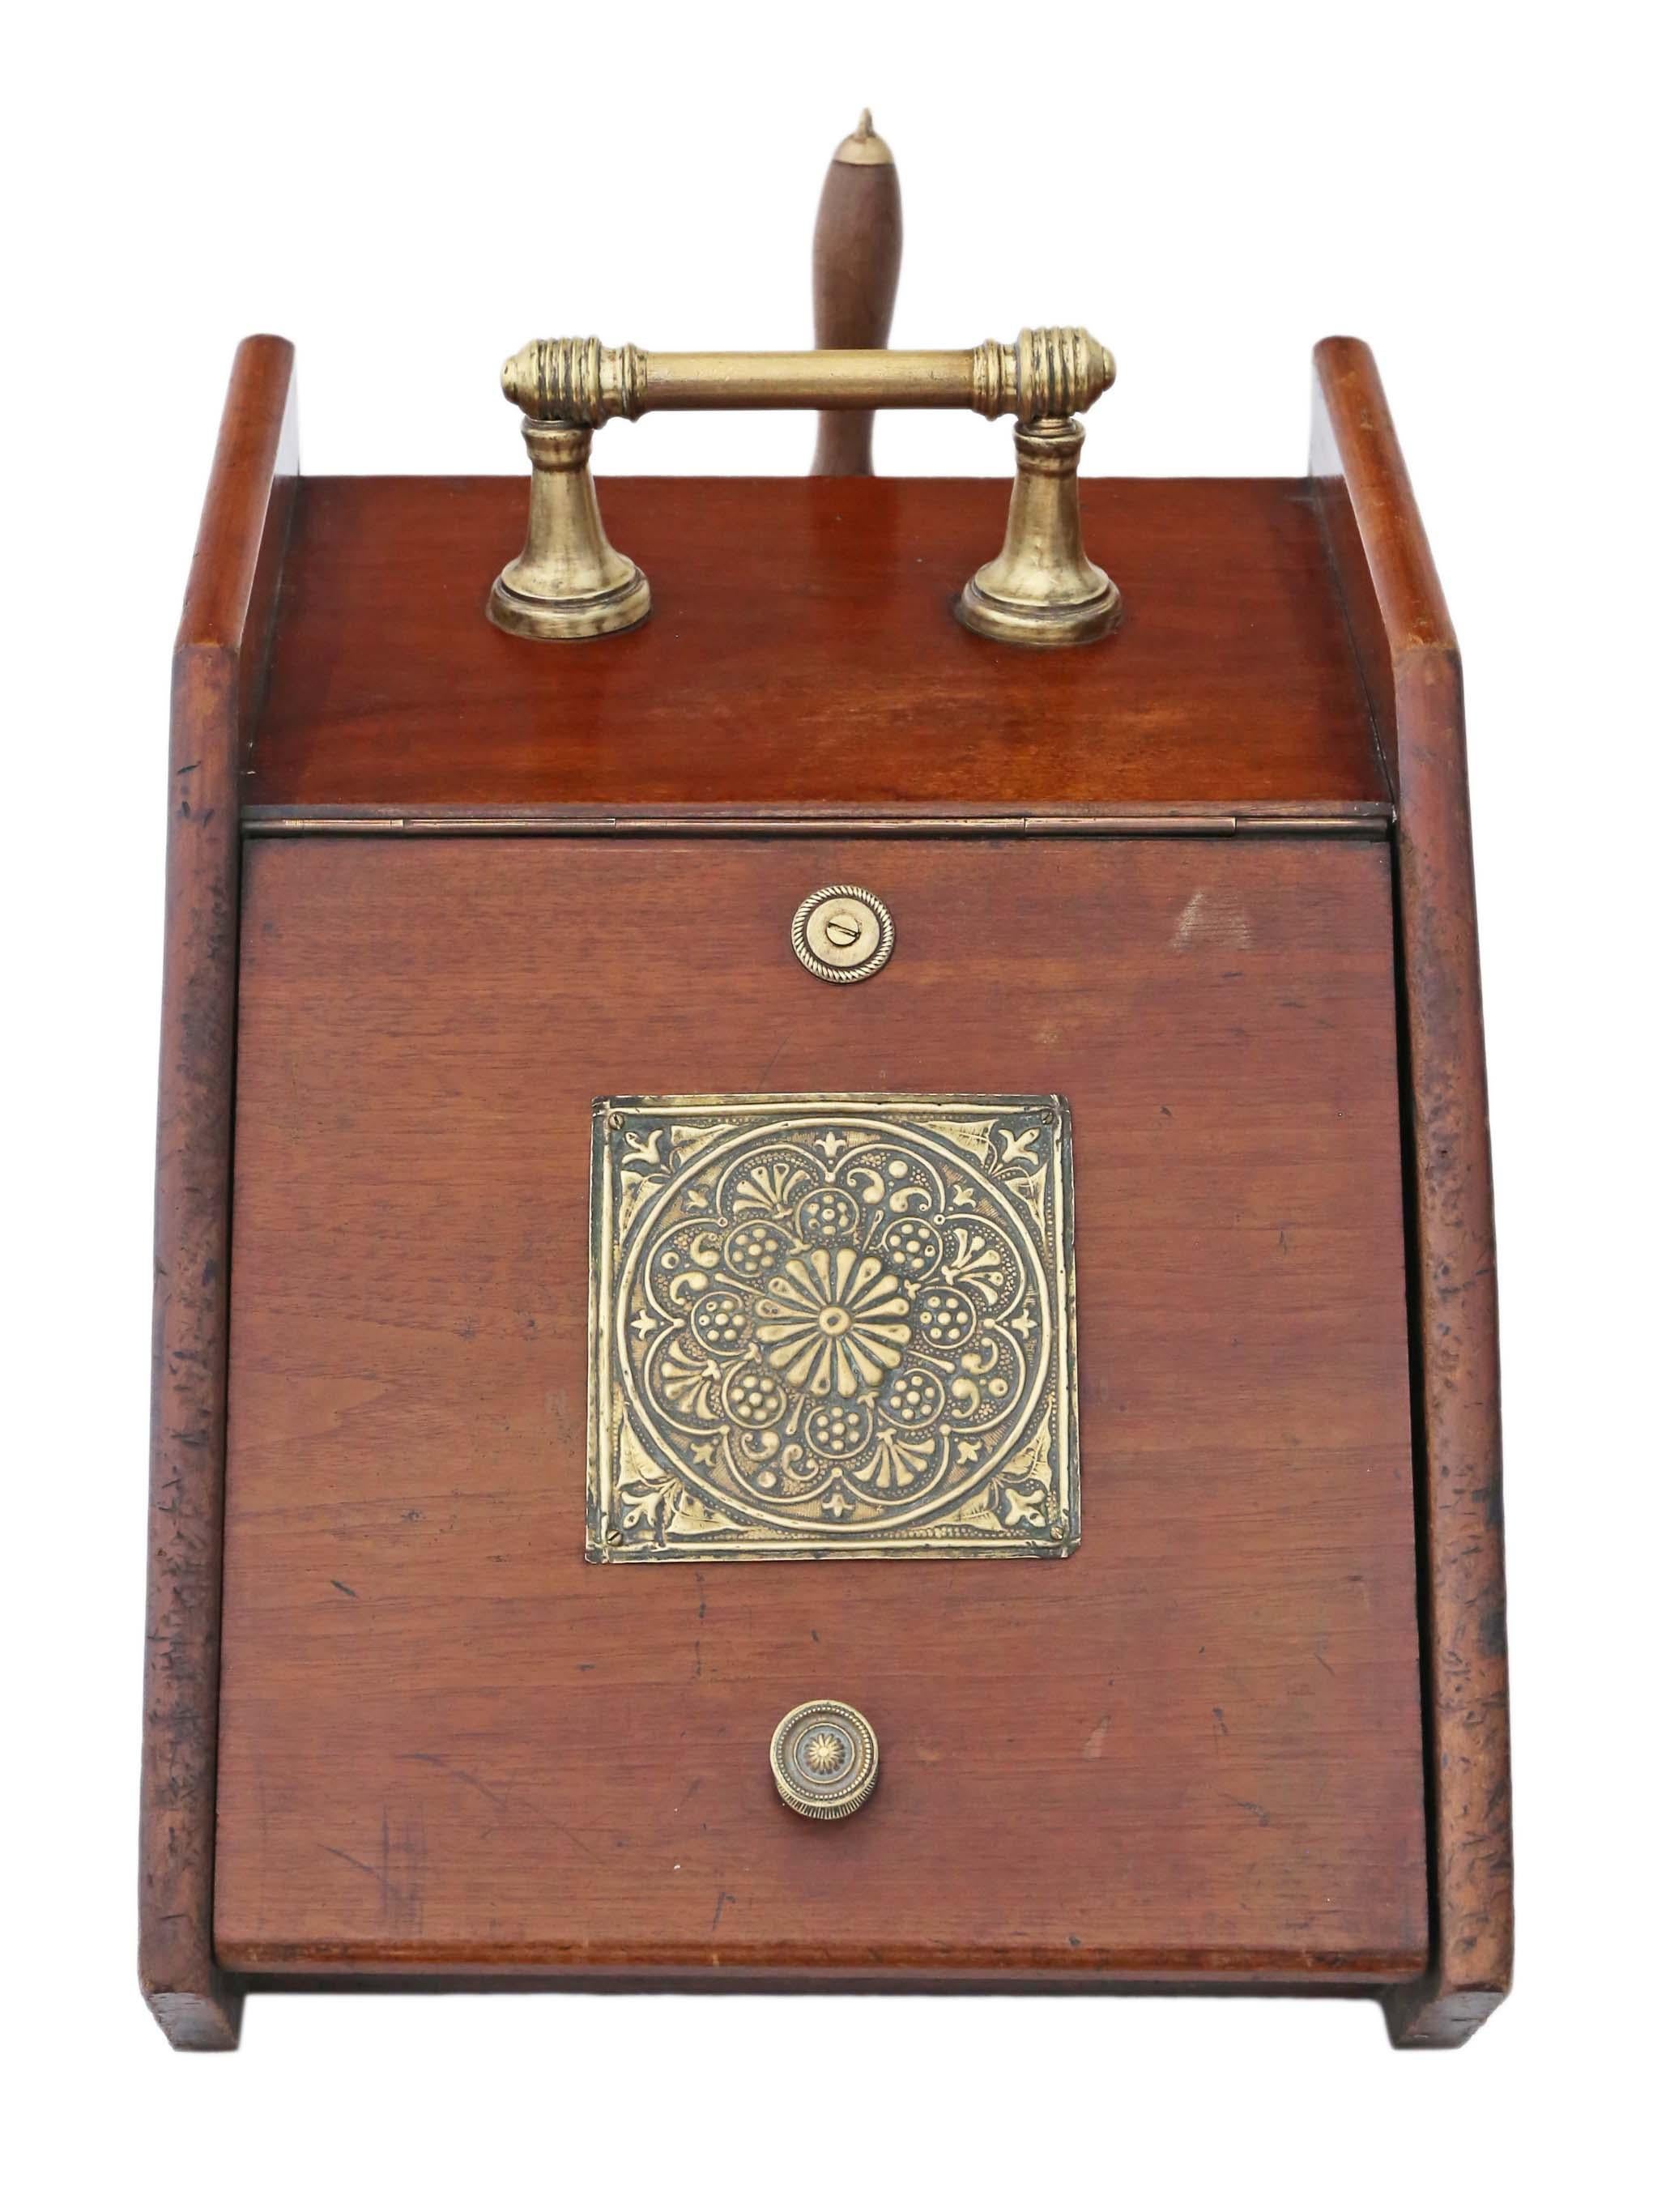 Antique quality Art Nouveau mahogany and brass perdonium coal scuttle, box or cabinet, circa 1910.
This is a lovely item, that is full of charm and character.
This is a heavy quality piece, with no loose joints... far better than most. No